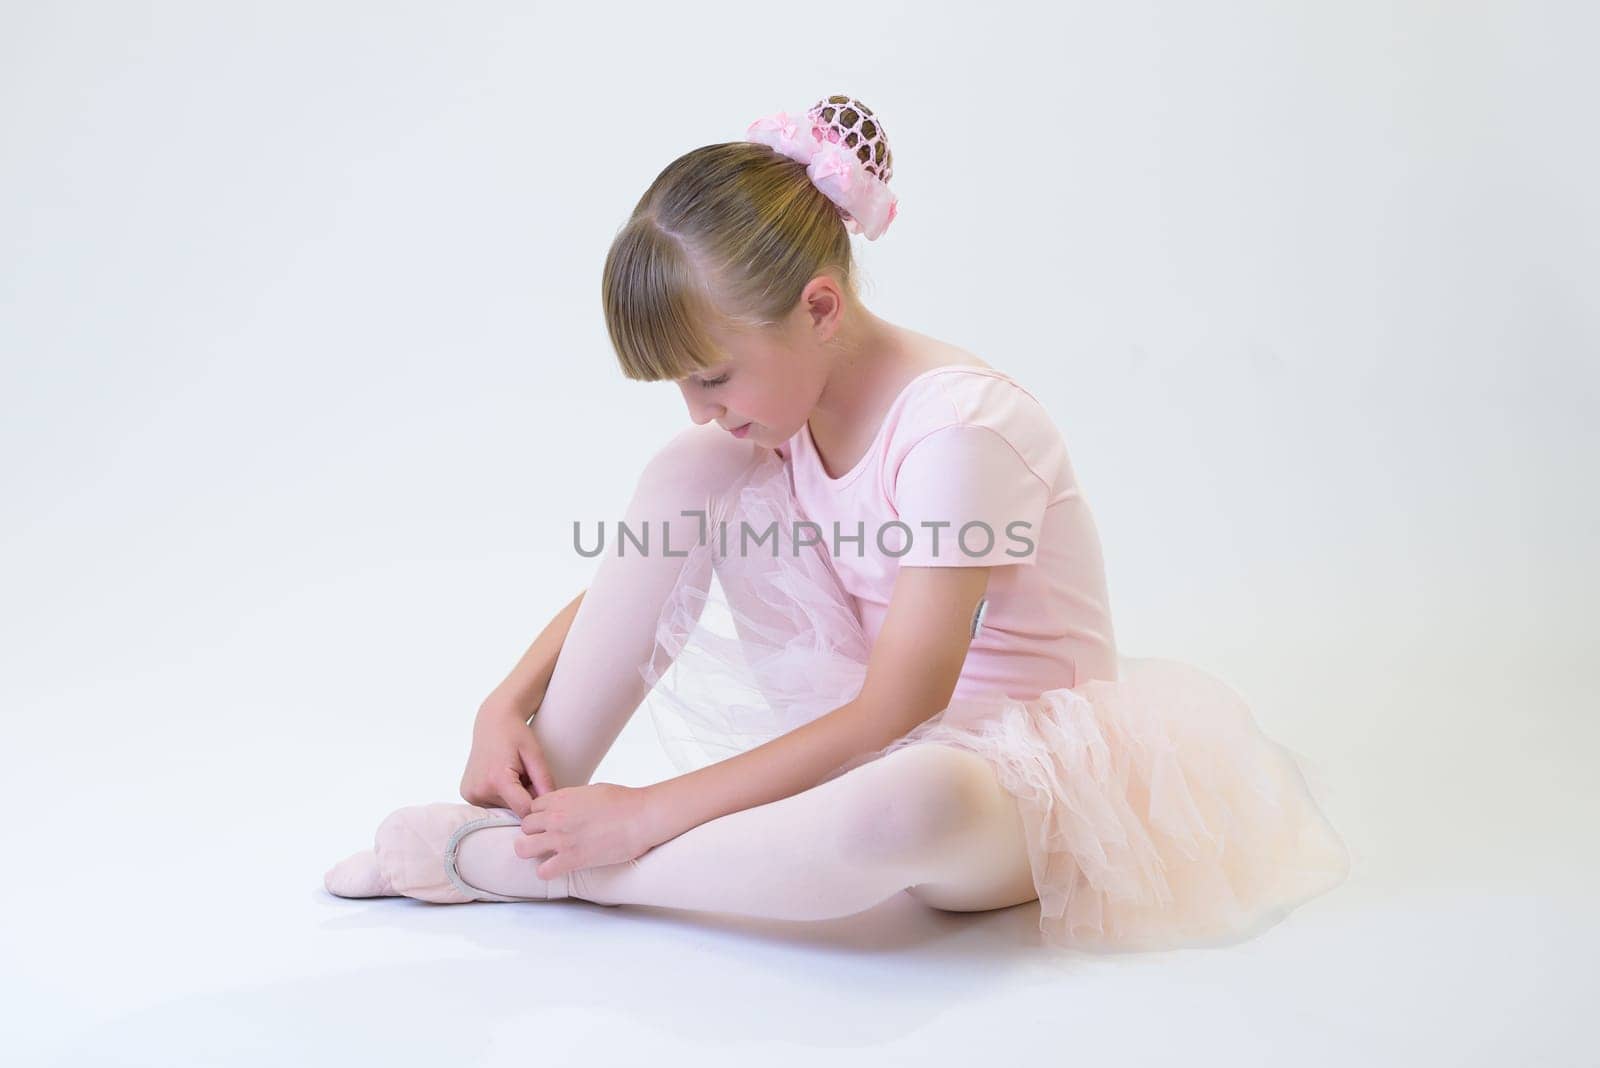 Dancing girl lying on the floor posing for the camera.